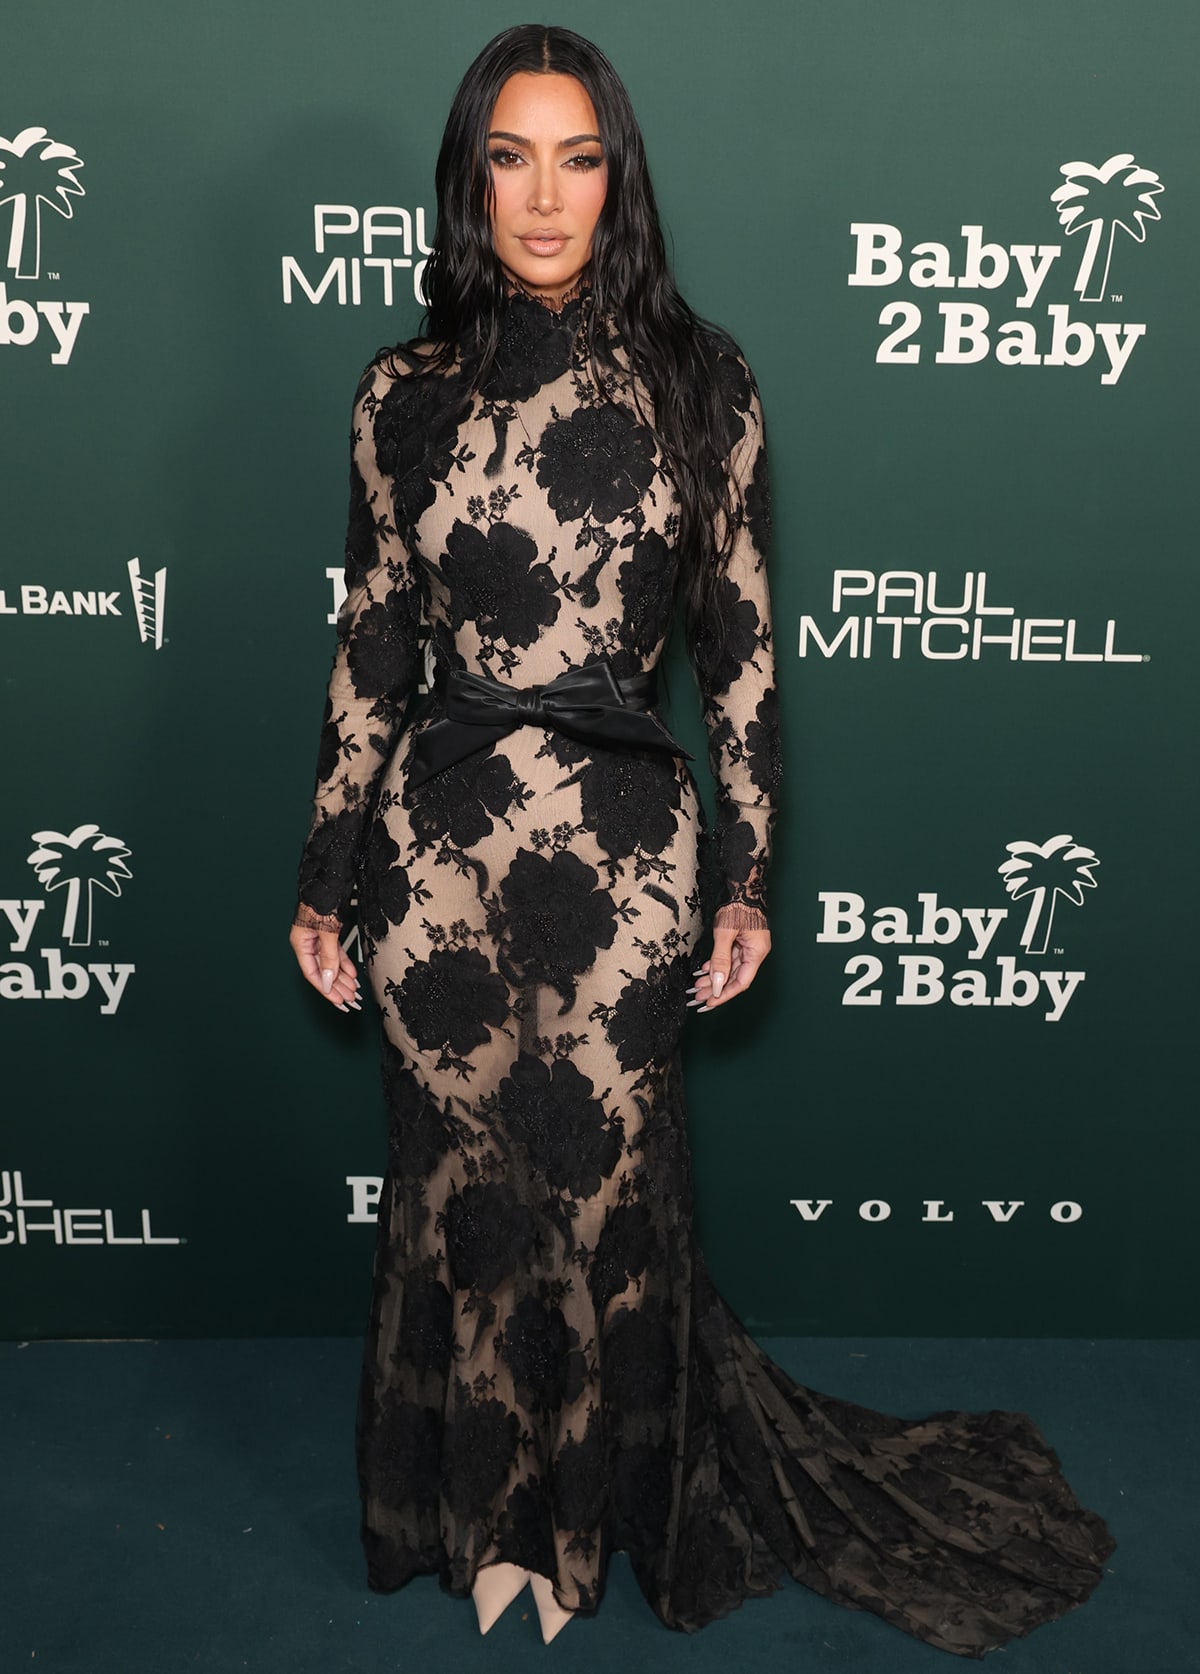 Kim Kardashian embraces gothic glamour in a see-through black floral lace dress by Balenciaga with a nude bodysuit and pantaboots underneath